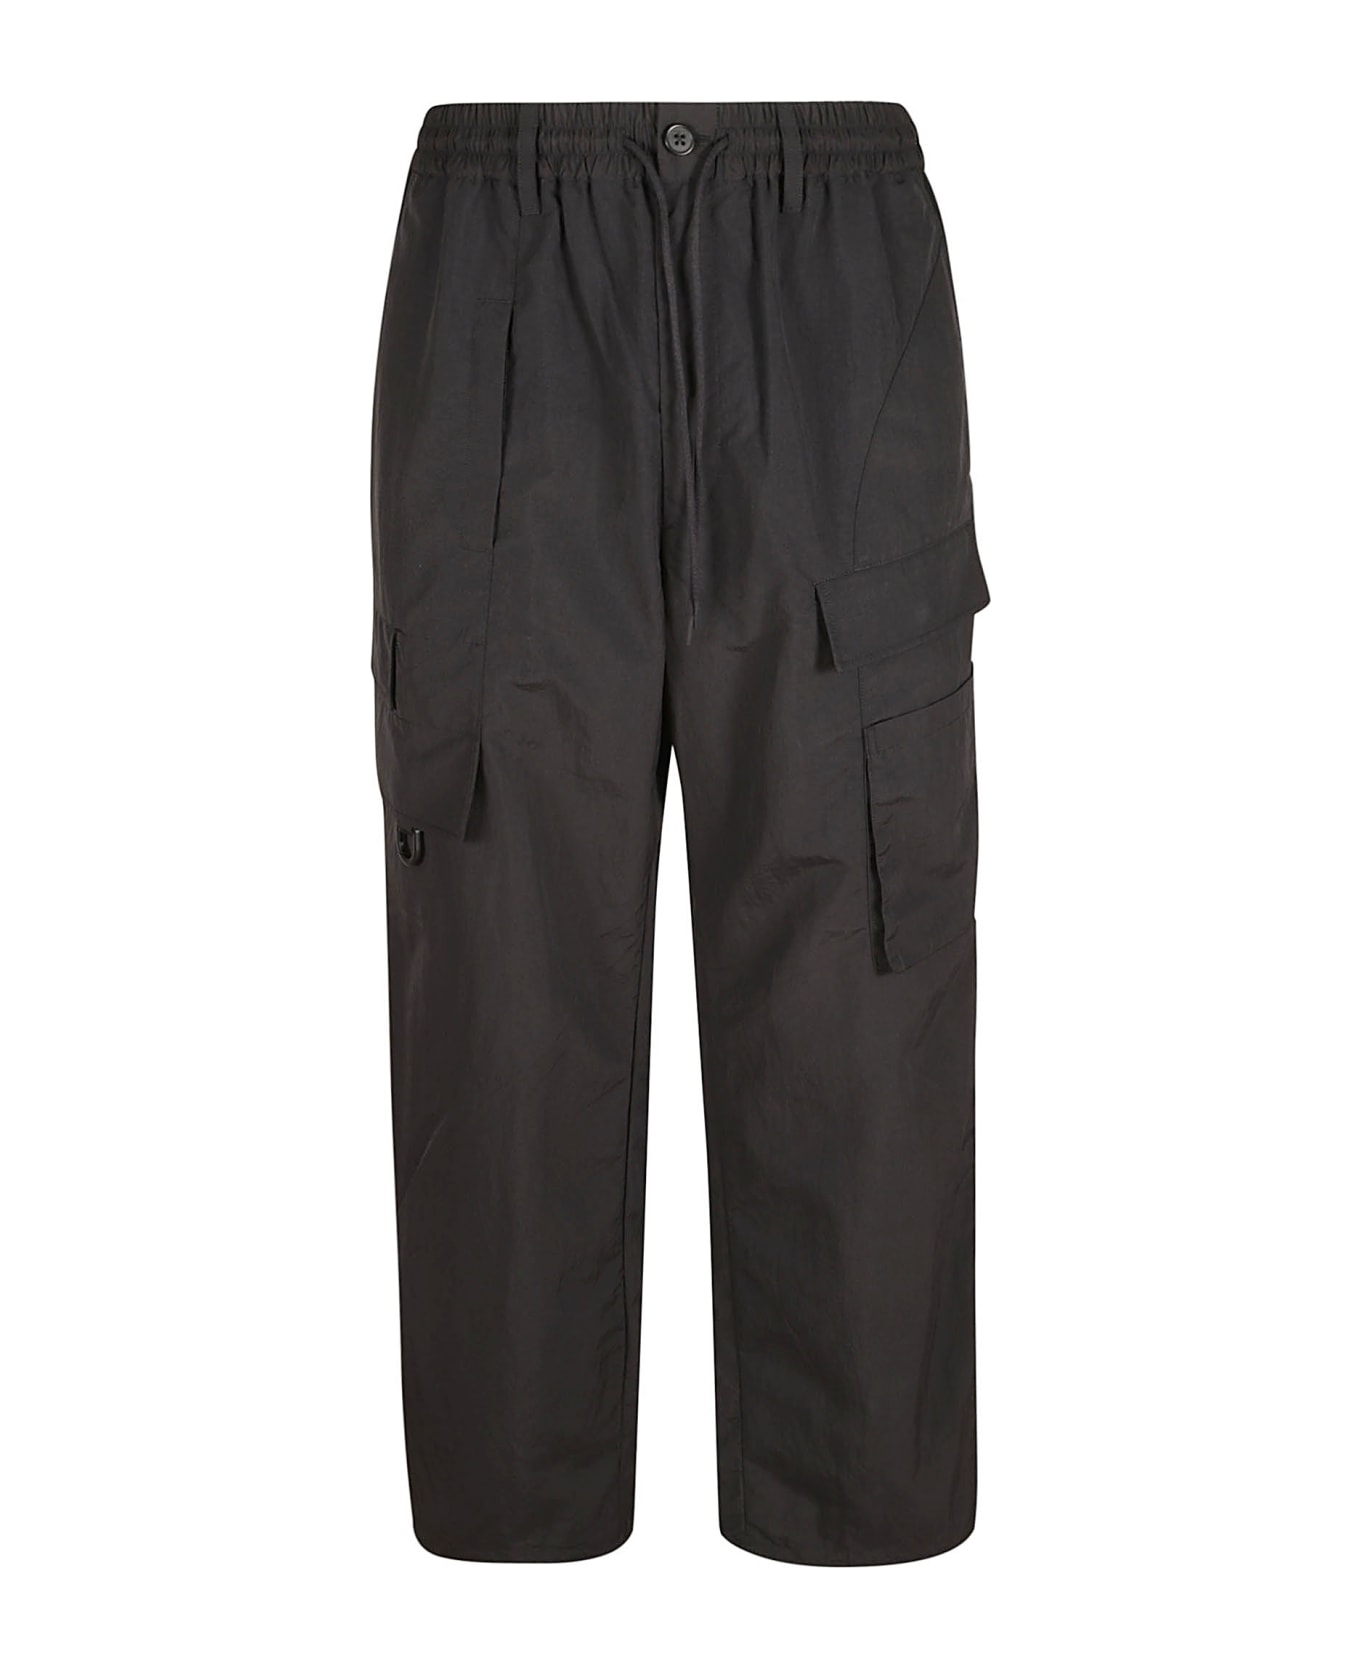 Y-3 Buttoned Cargo Trousers - Black name:467